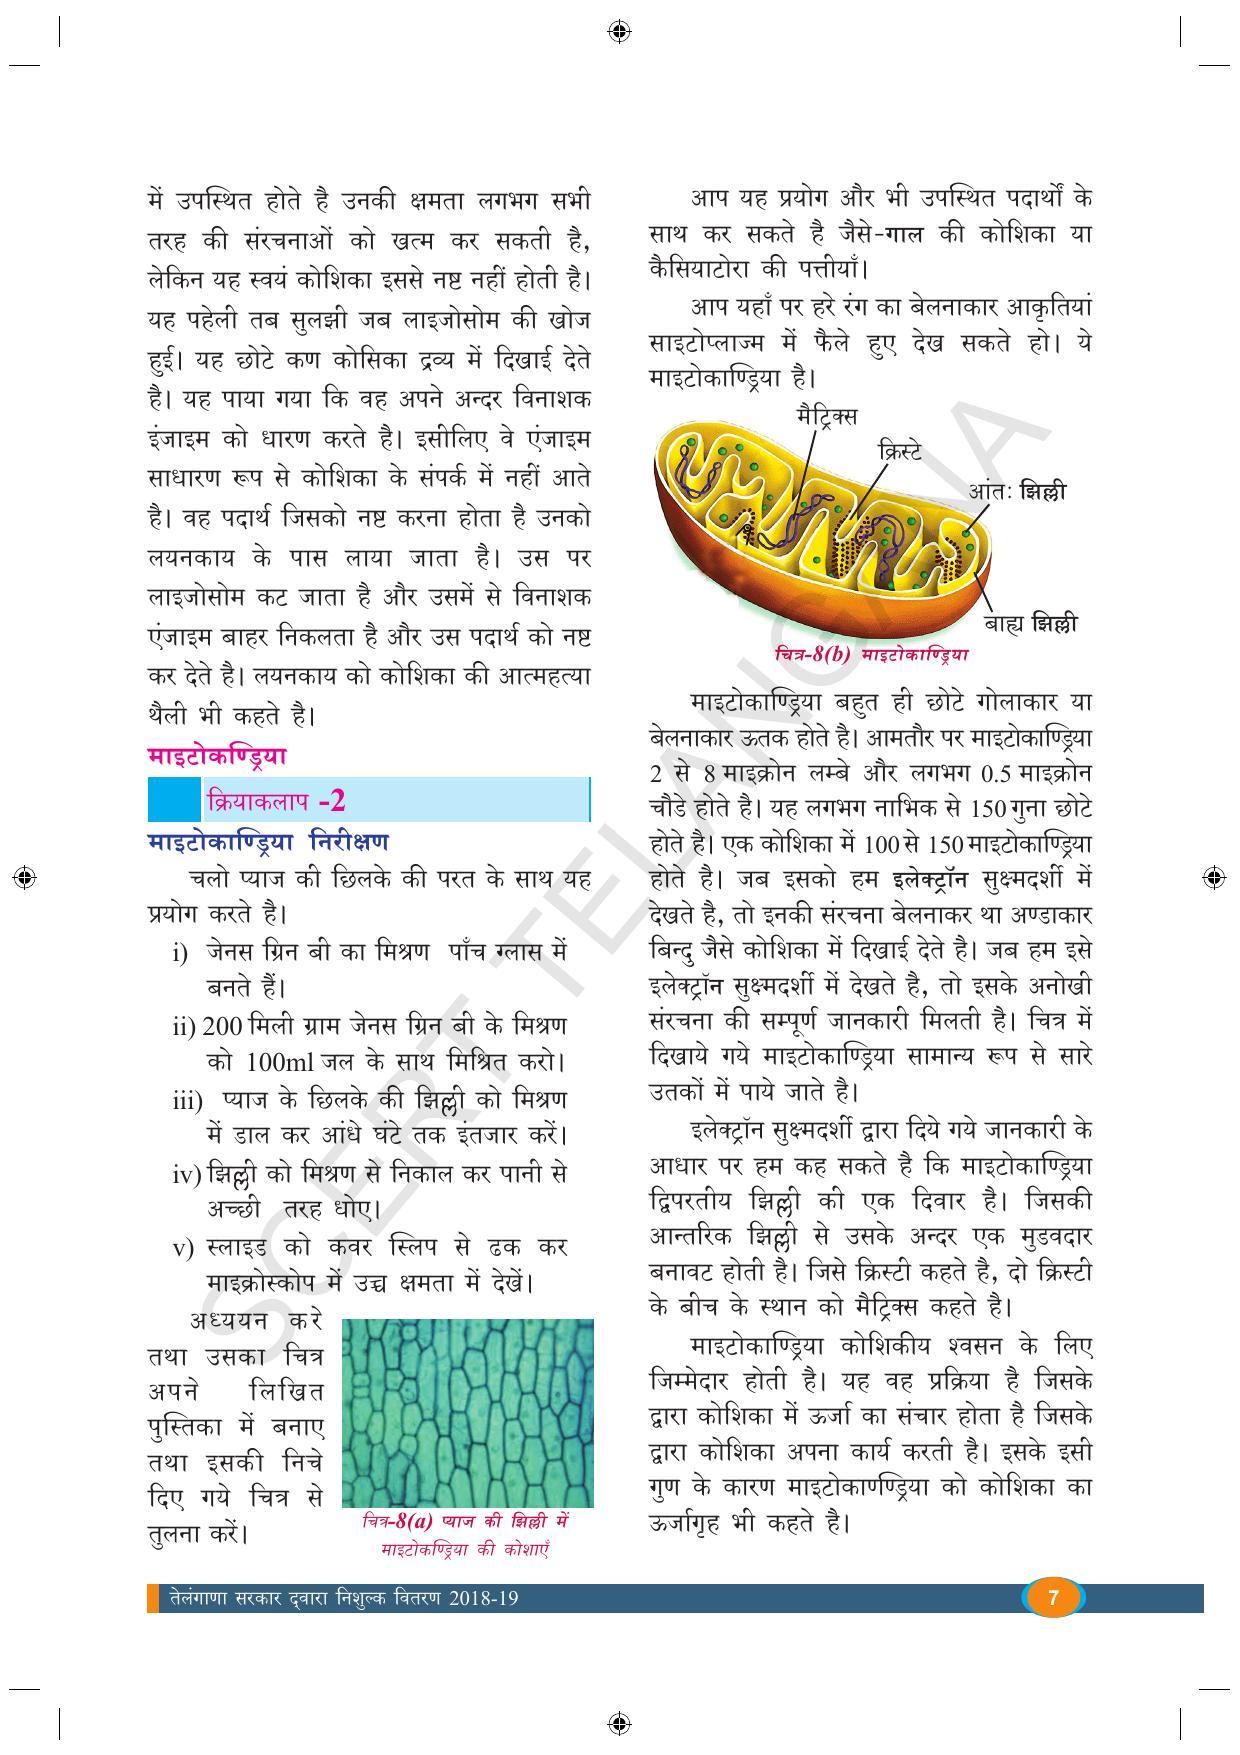 TS SCERT Class 9 Biological Science (Hindi Medium) Text Book - Page 19